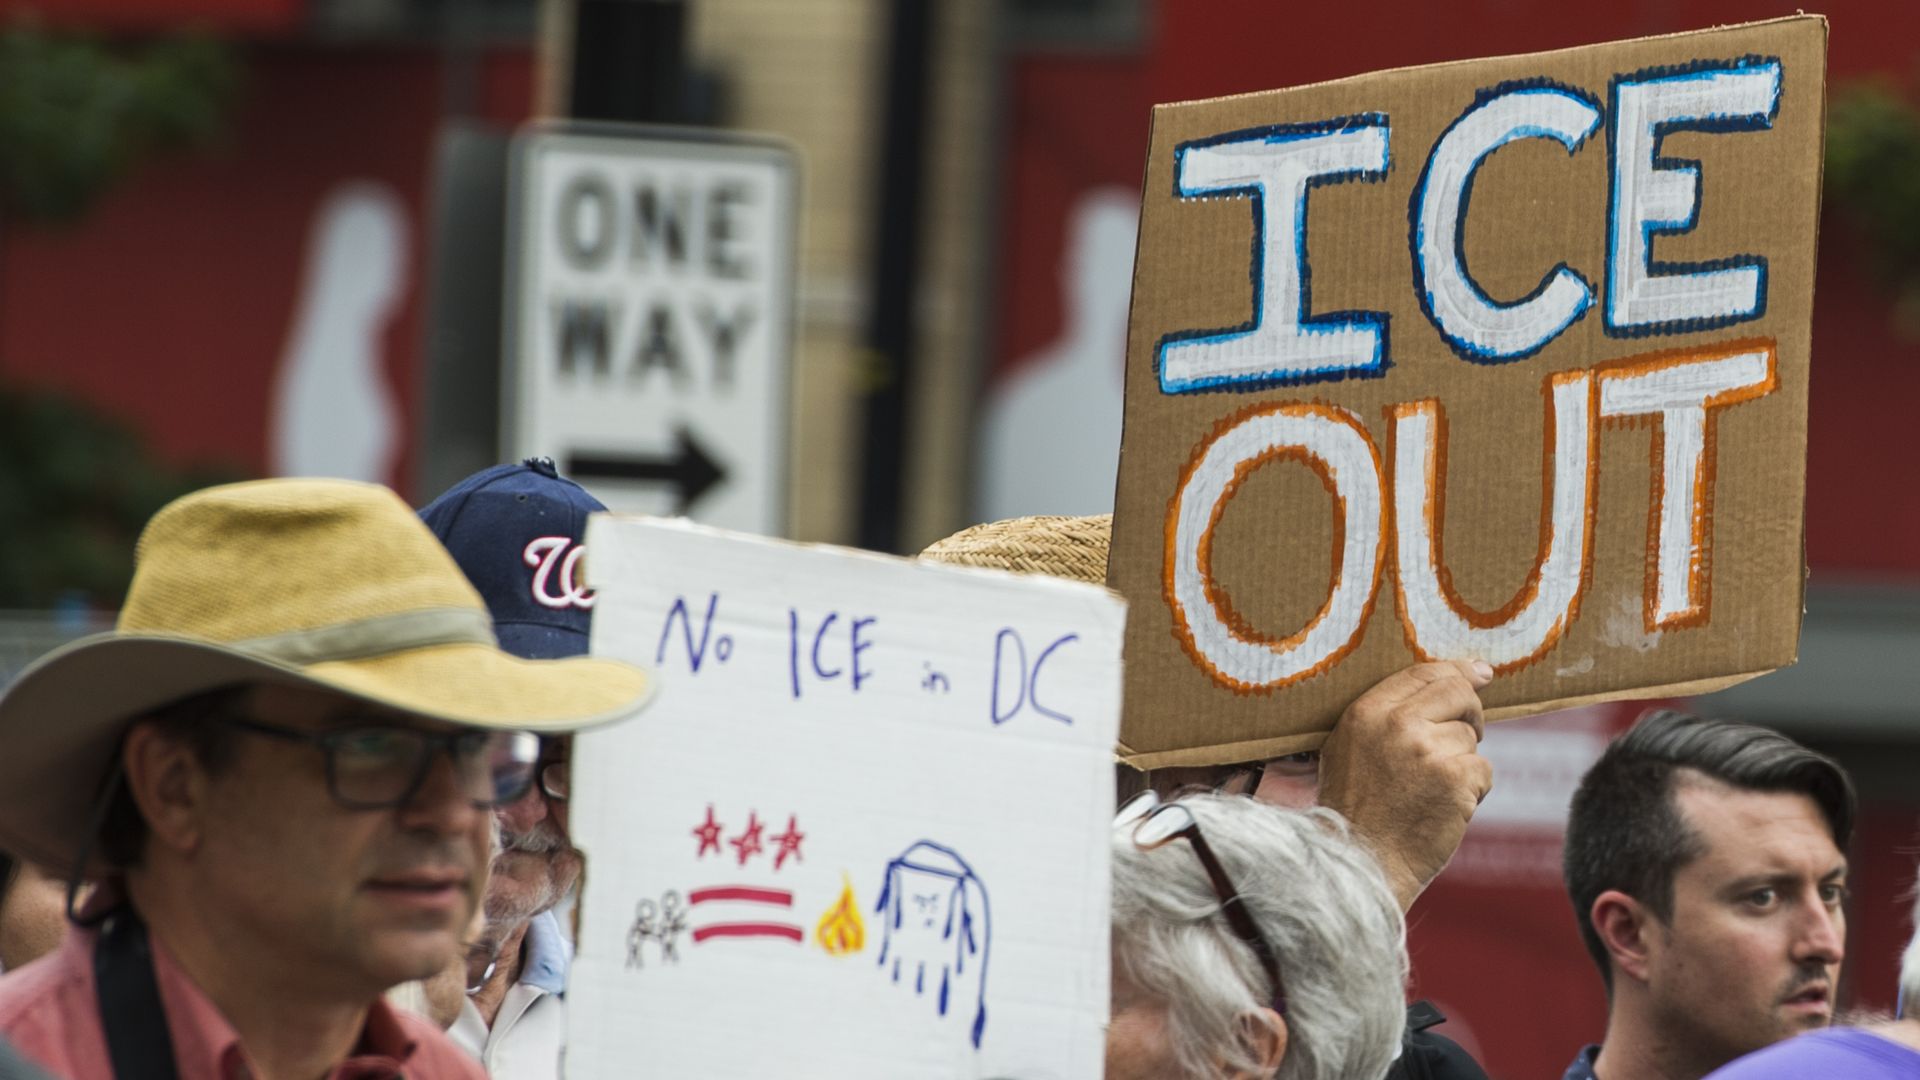 This image shows someone holding a sign that reads "ICE OUT" in a crowd.